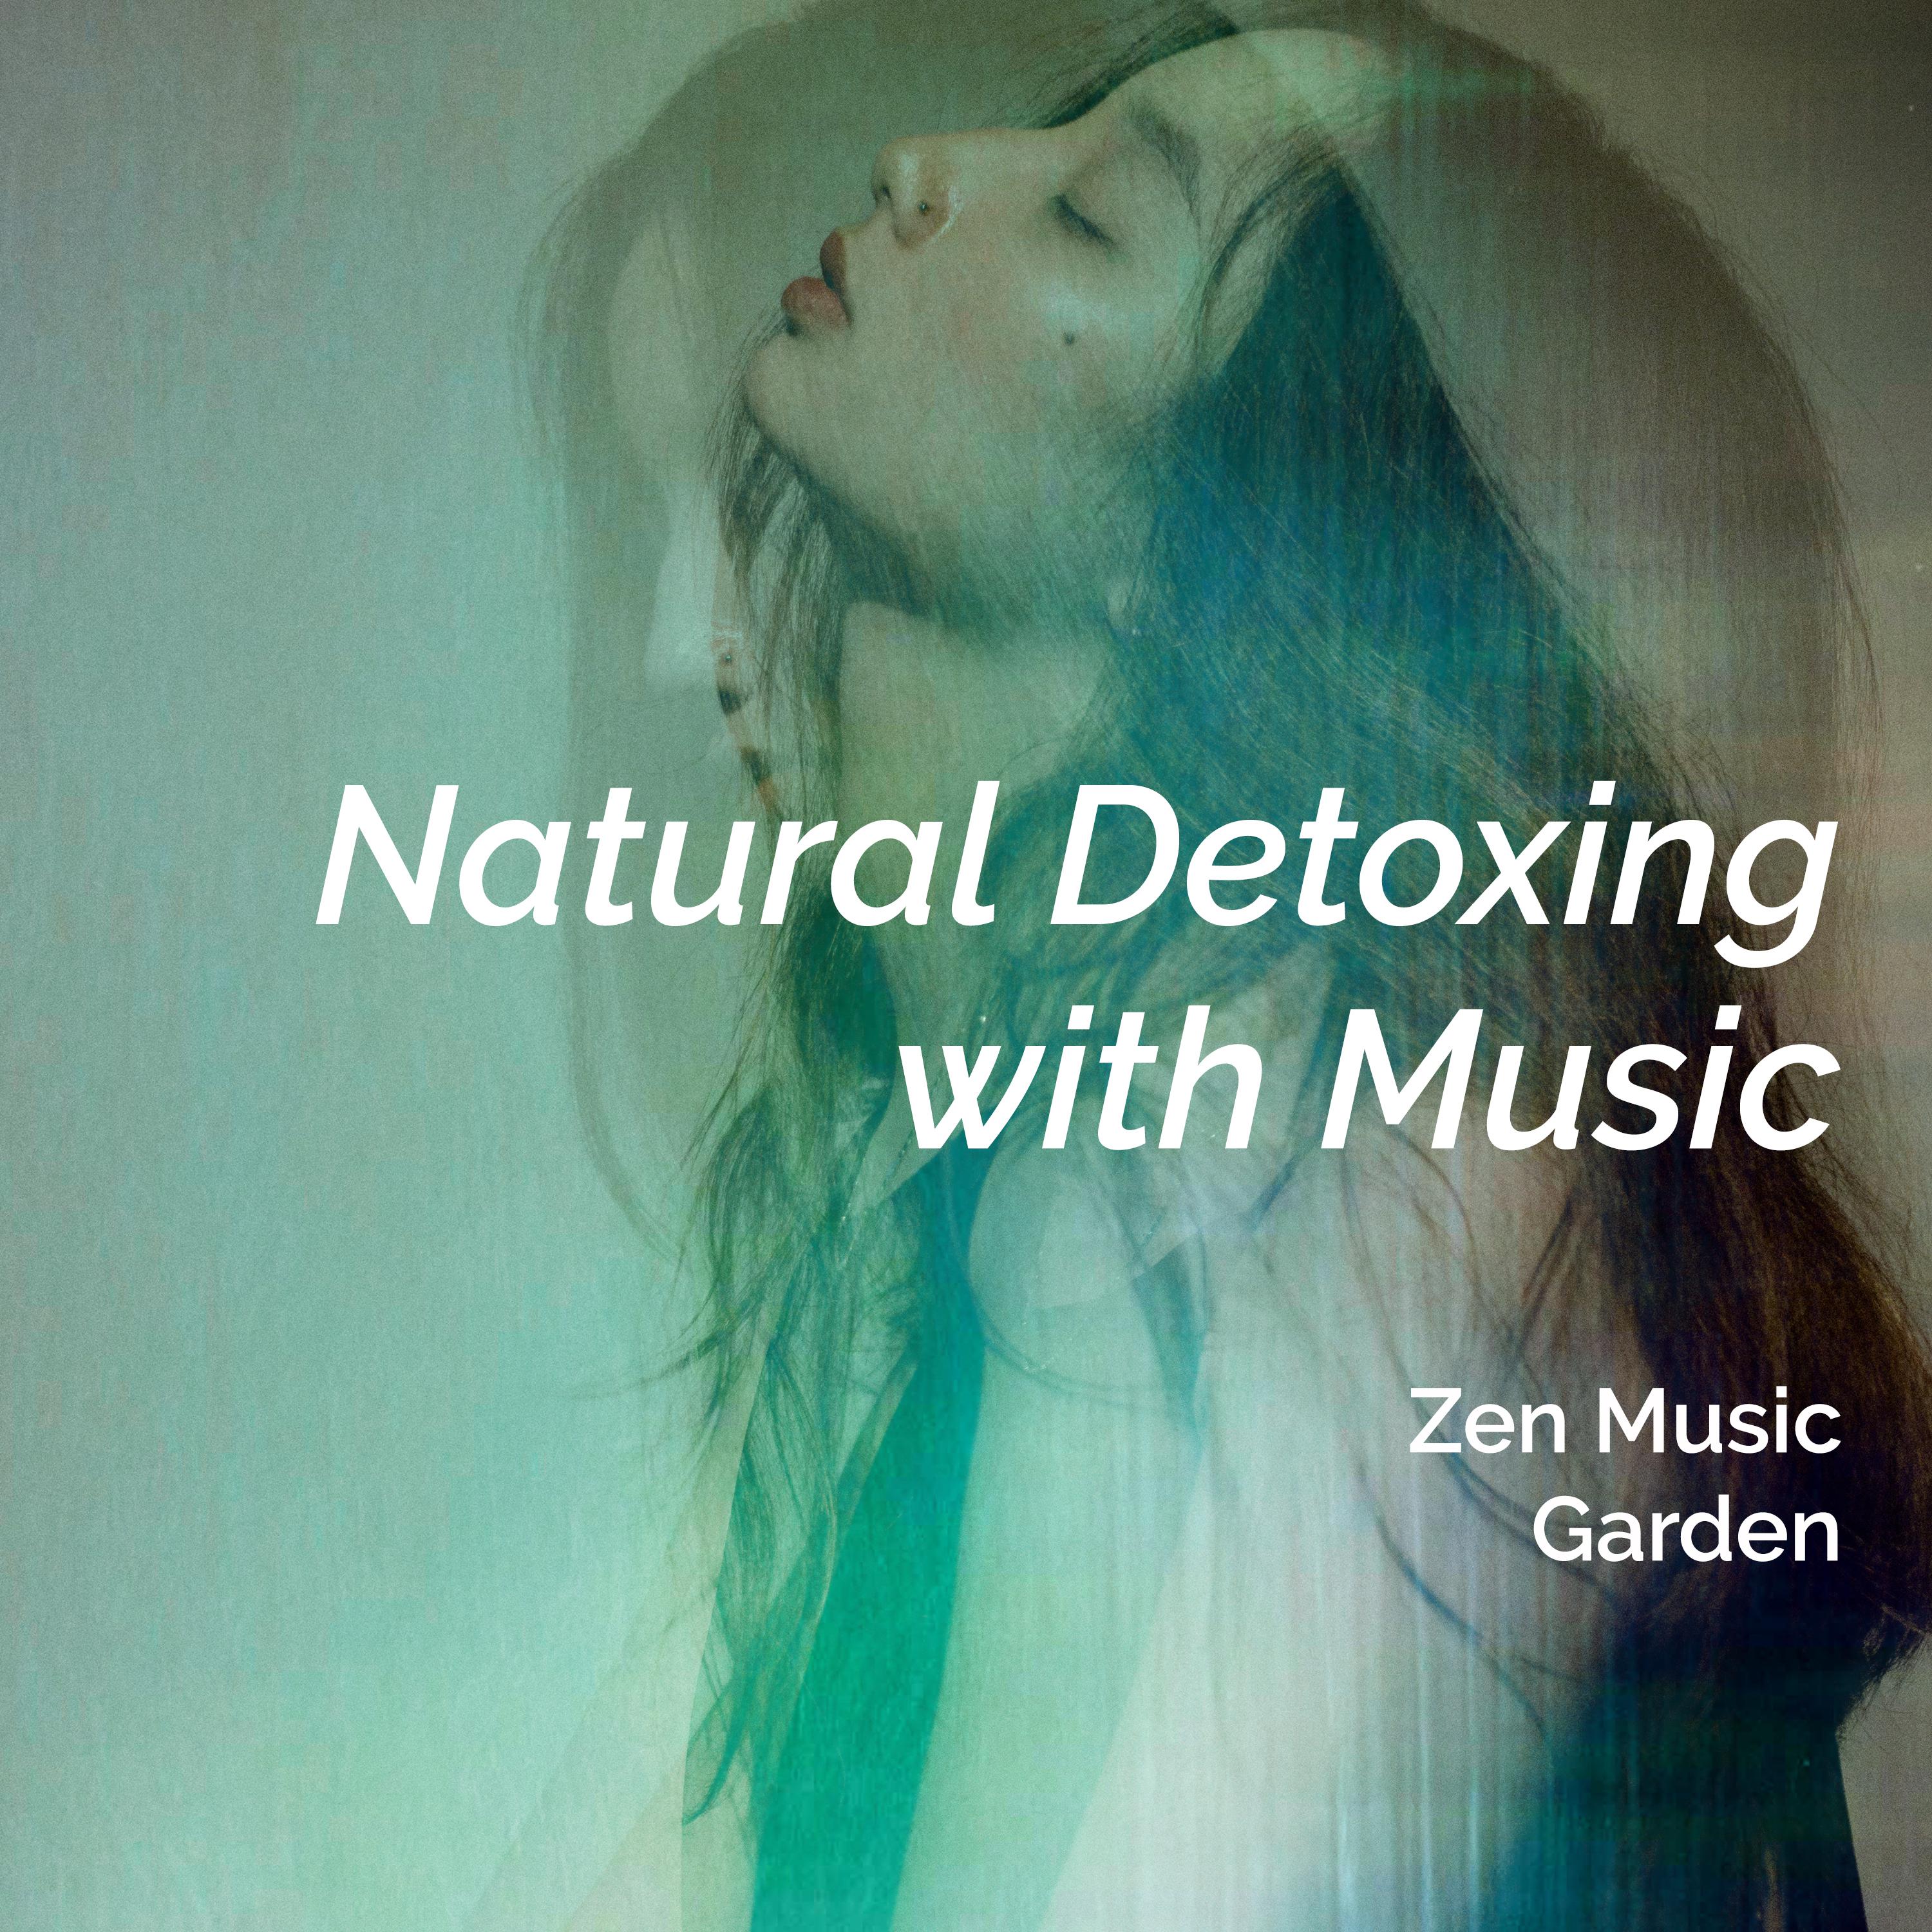 Natural Detoxing with Music